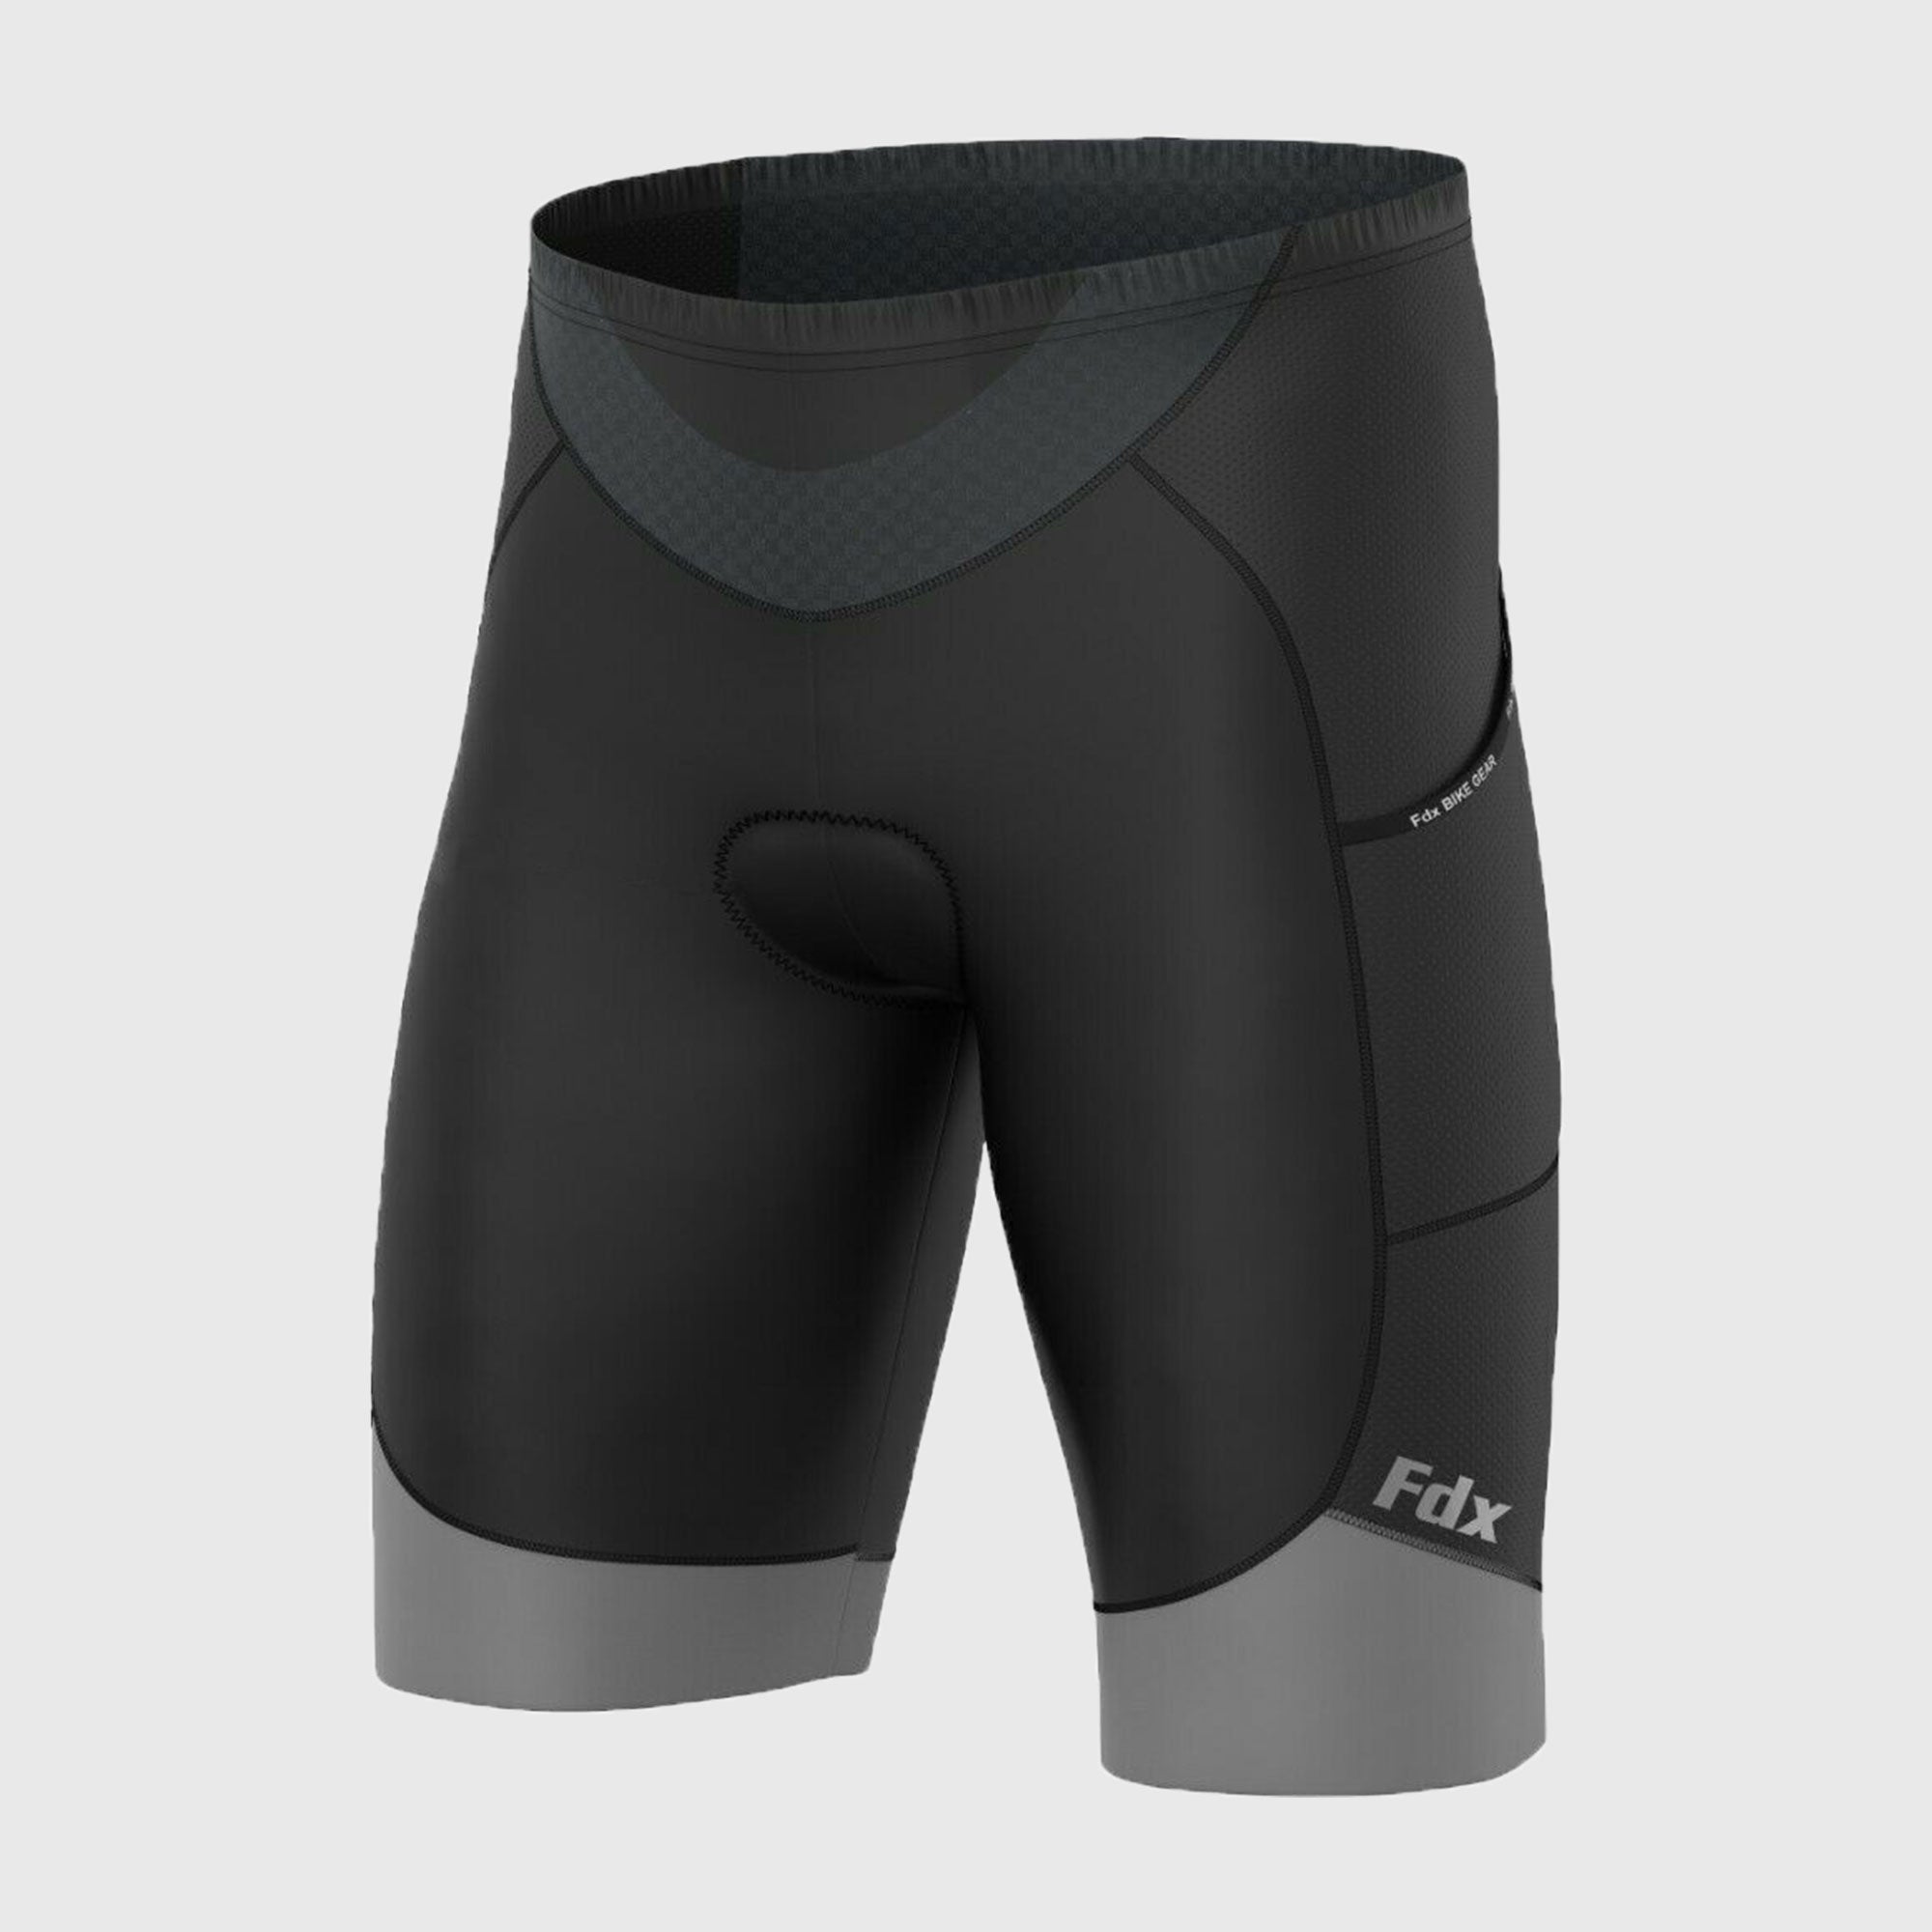 Fdx Essential Grey Men's Padded Cycling Shorts with Pockets